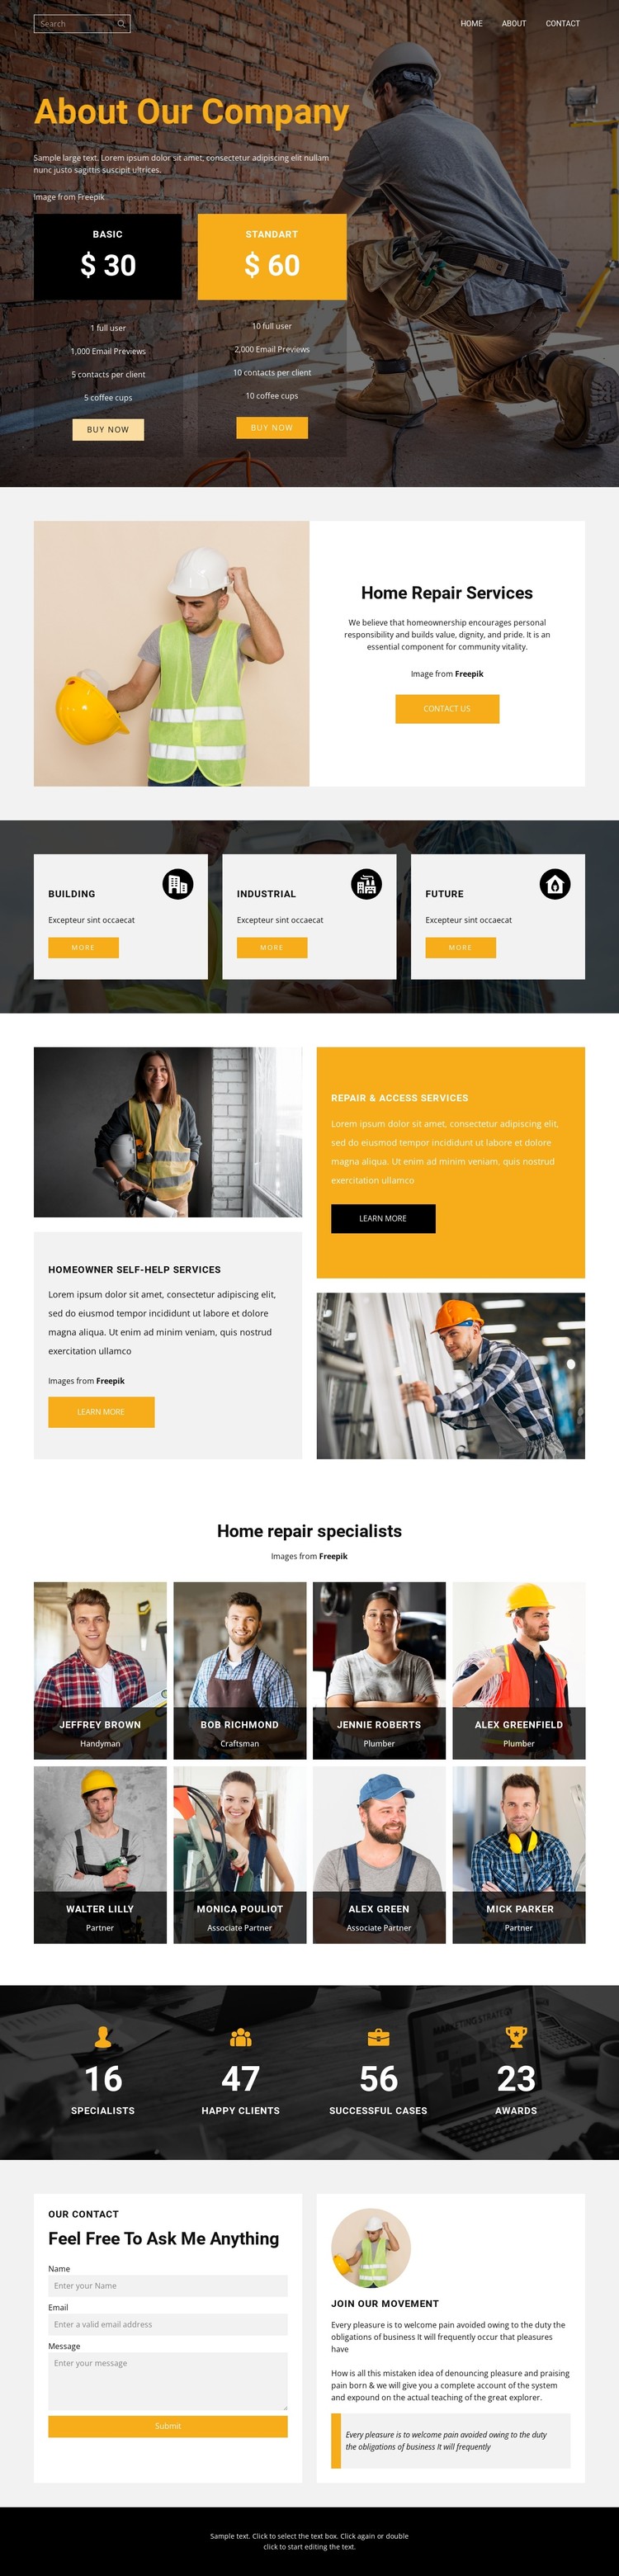 We will build a better home CSS Template